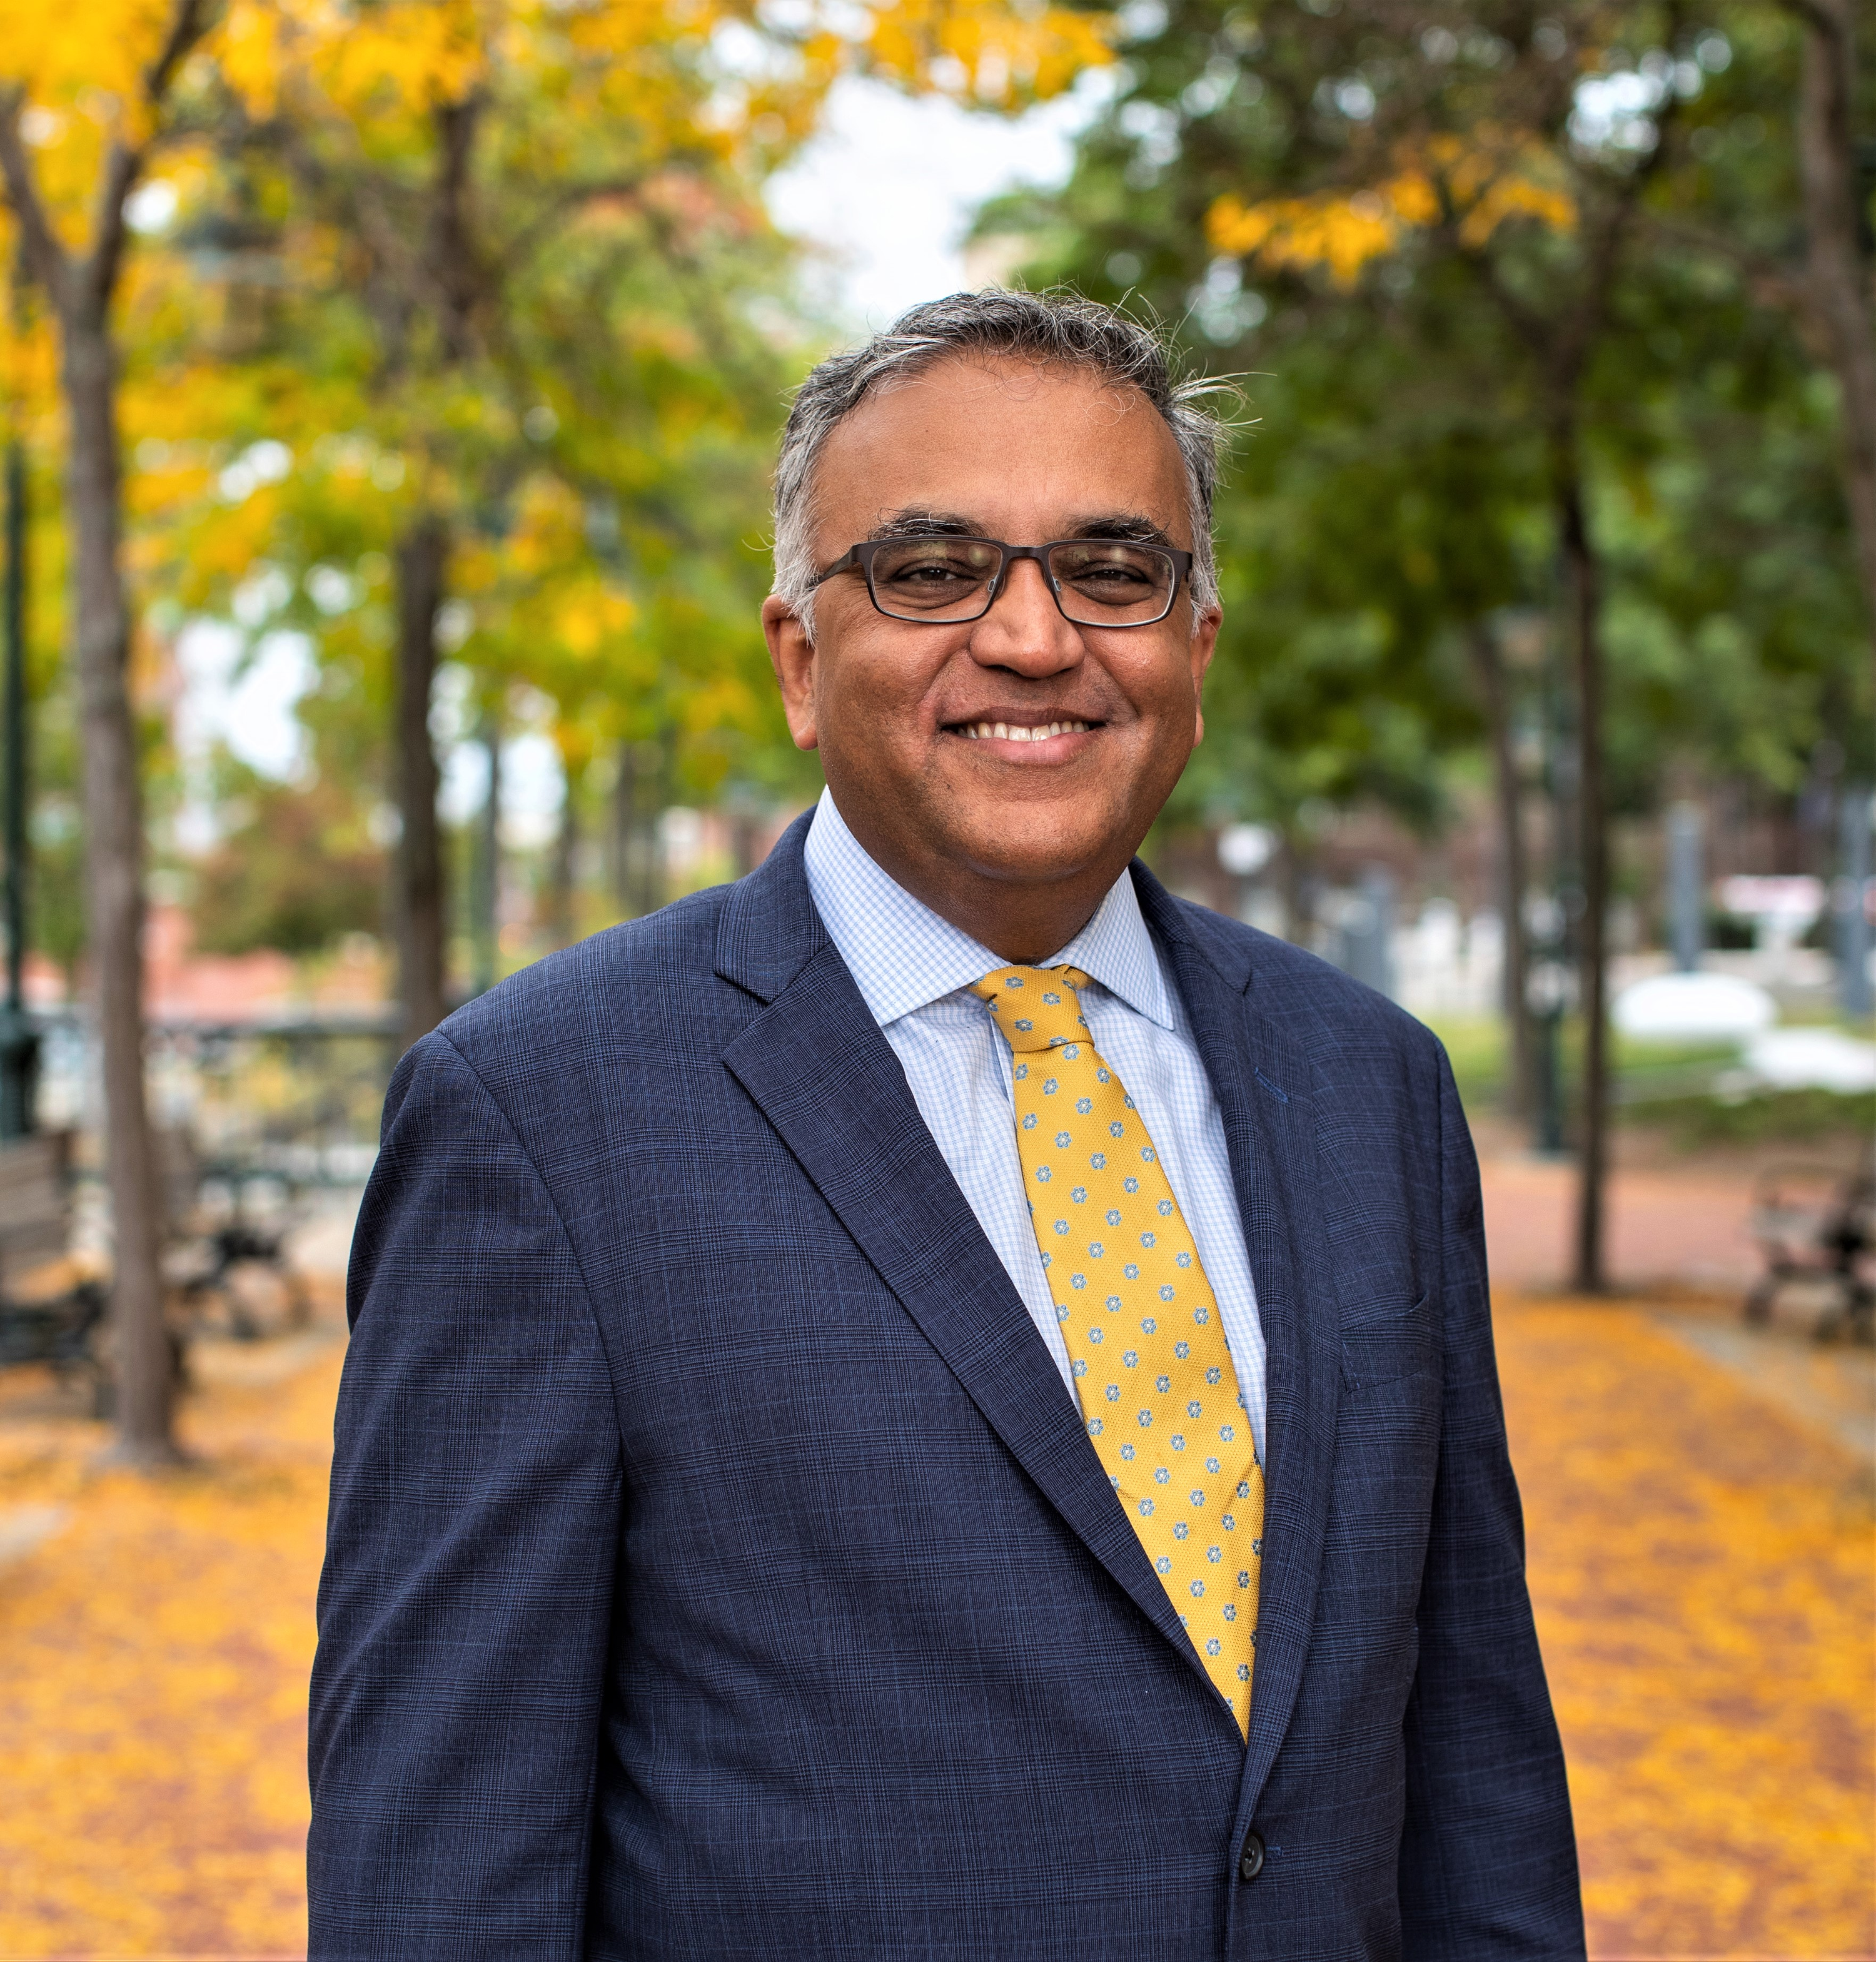 Welcome to Episode 25 of “COVID: What comes next,” an exclusive weekly Providence Journal/USA TODAY NETWORK podcast featuring Dr. Ashish Jha, dean of the Brown University School of Public Health and an internationally respected expert on pandemic response and preparedness.